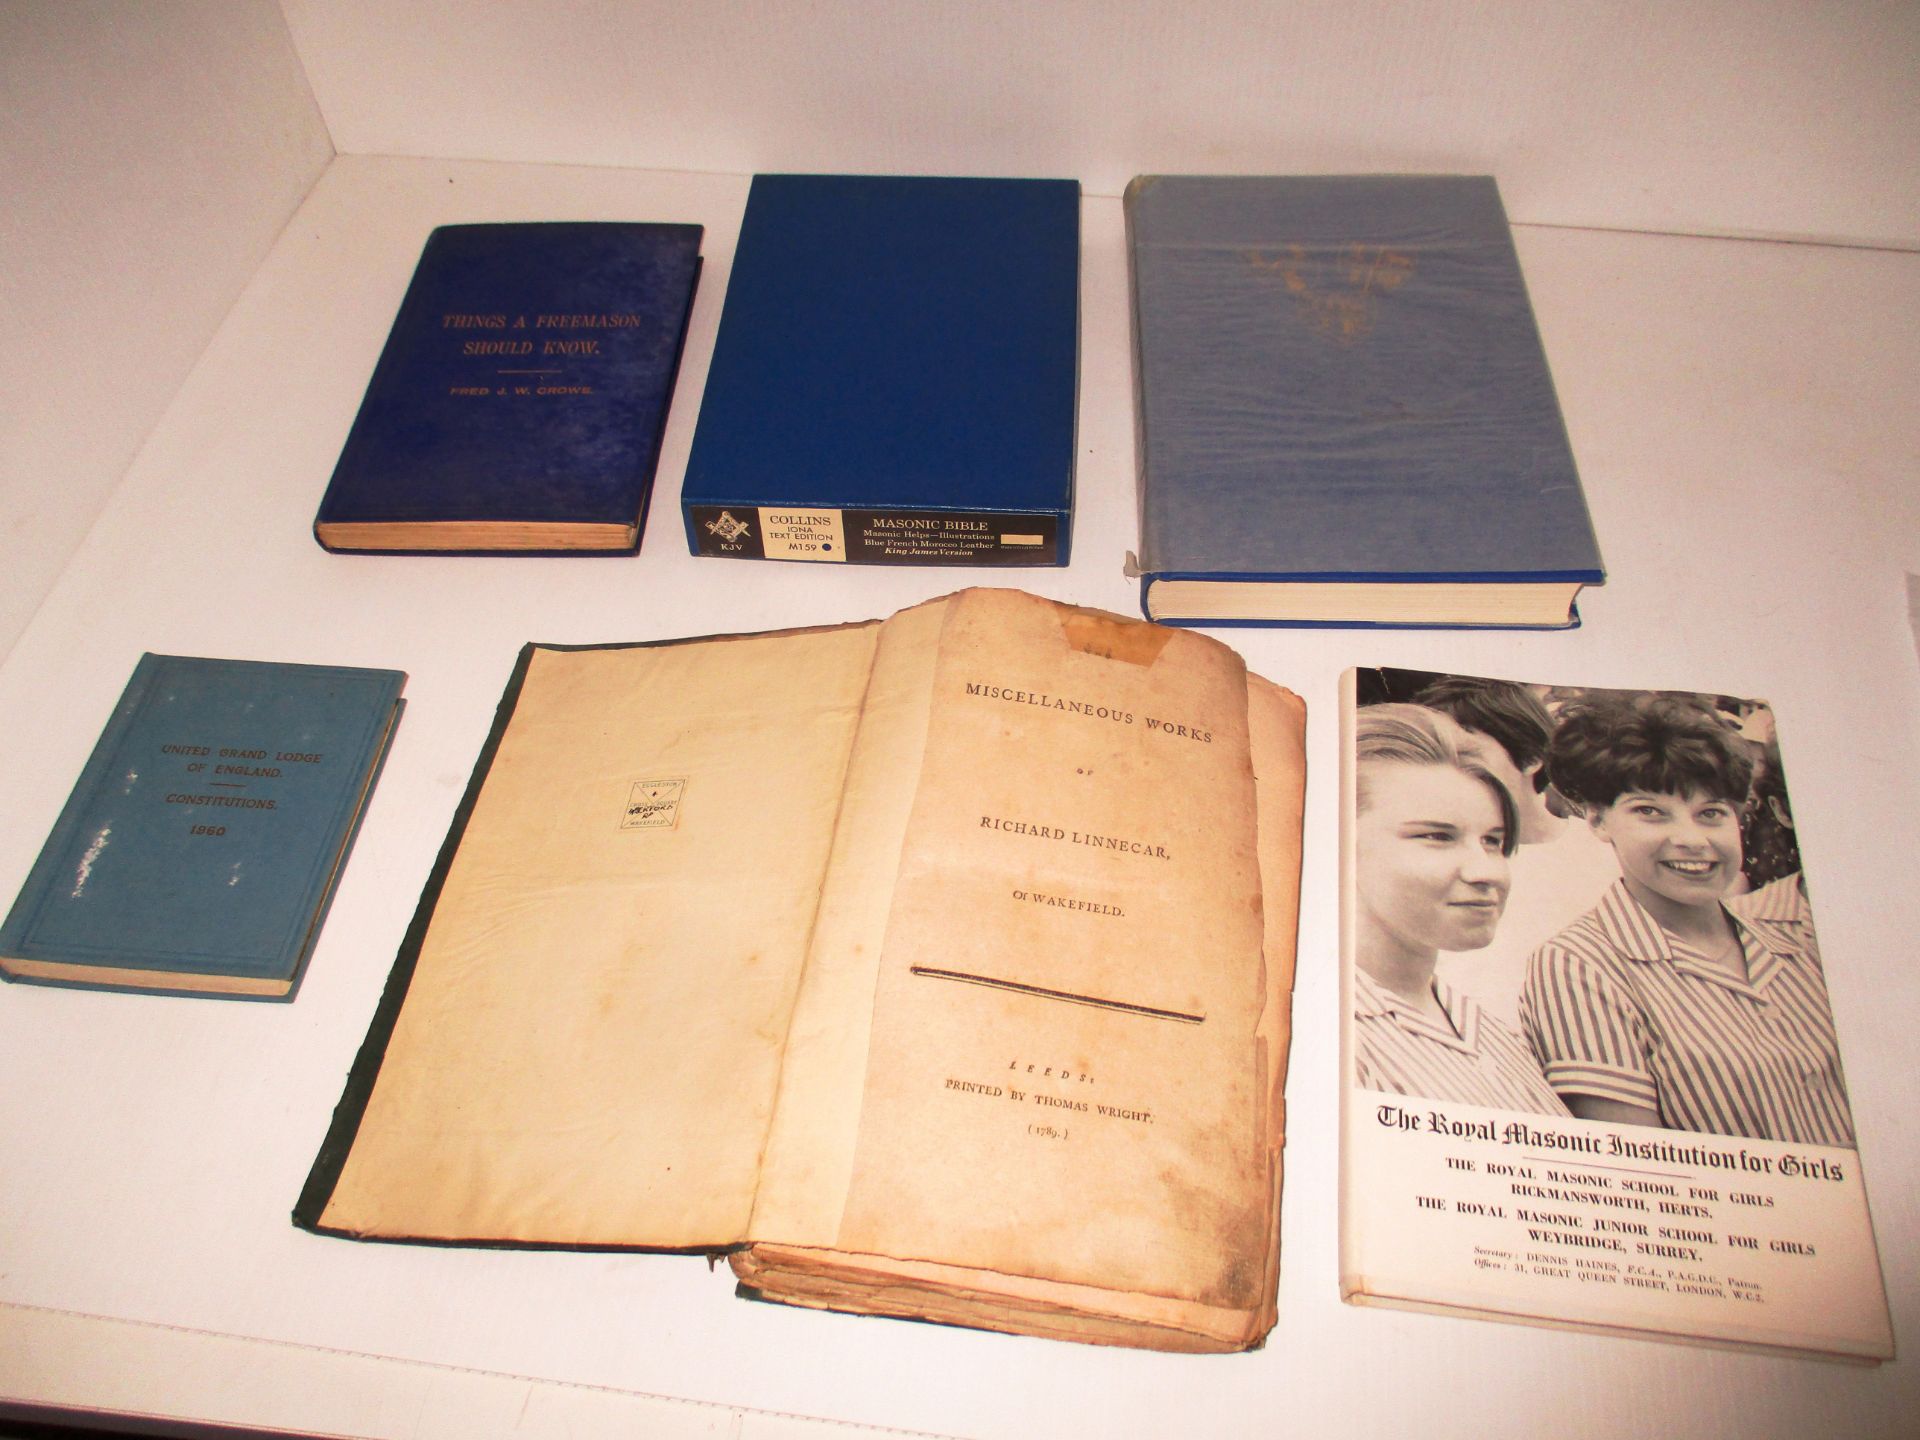 Seven assorted Masonic hard back books including The Miscellaneous Works of Richard Linnecar of